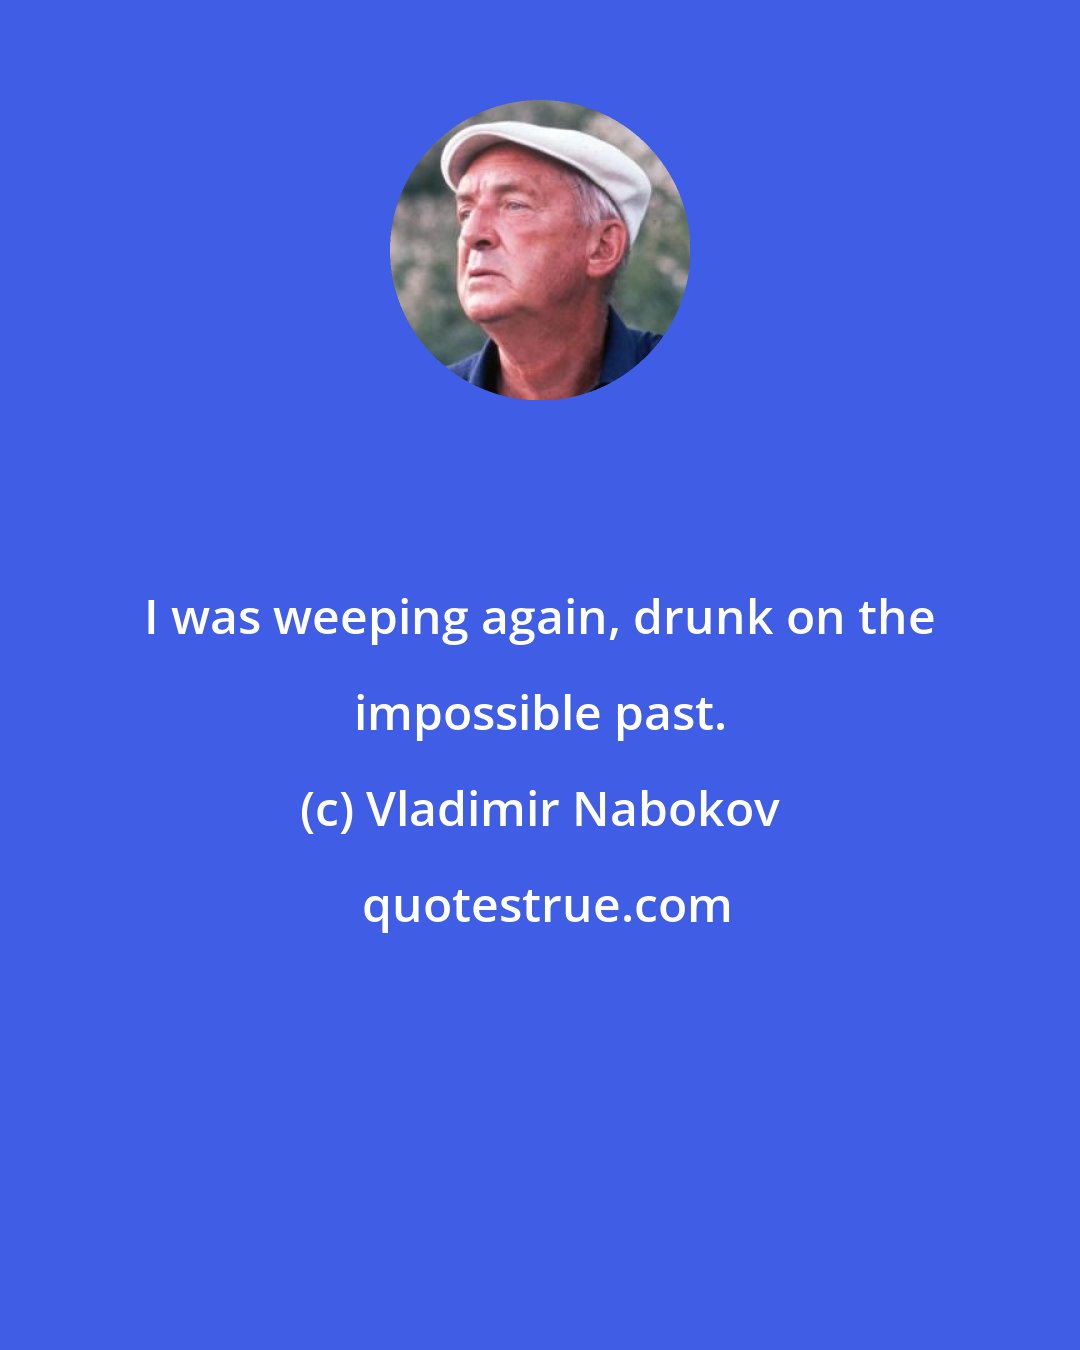 Vladimir Nabokov: I was weeping again, drunk on the impossible past.